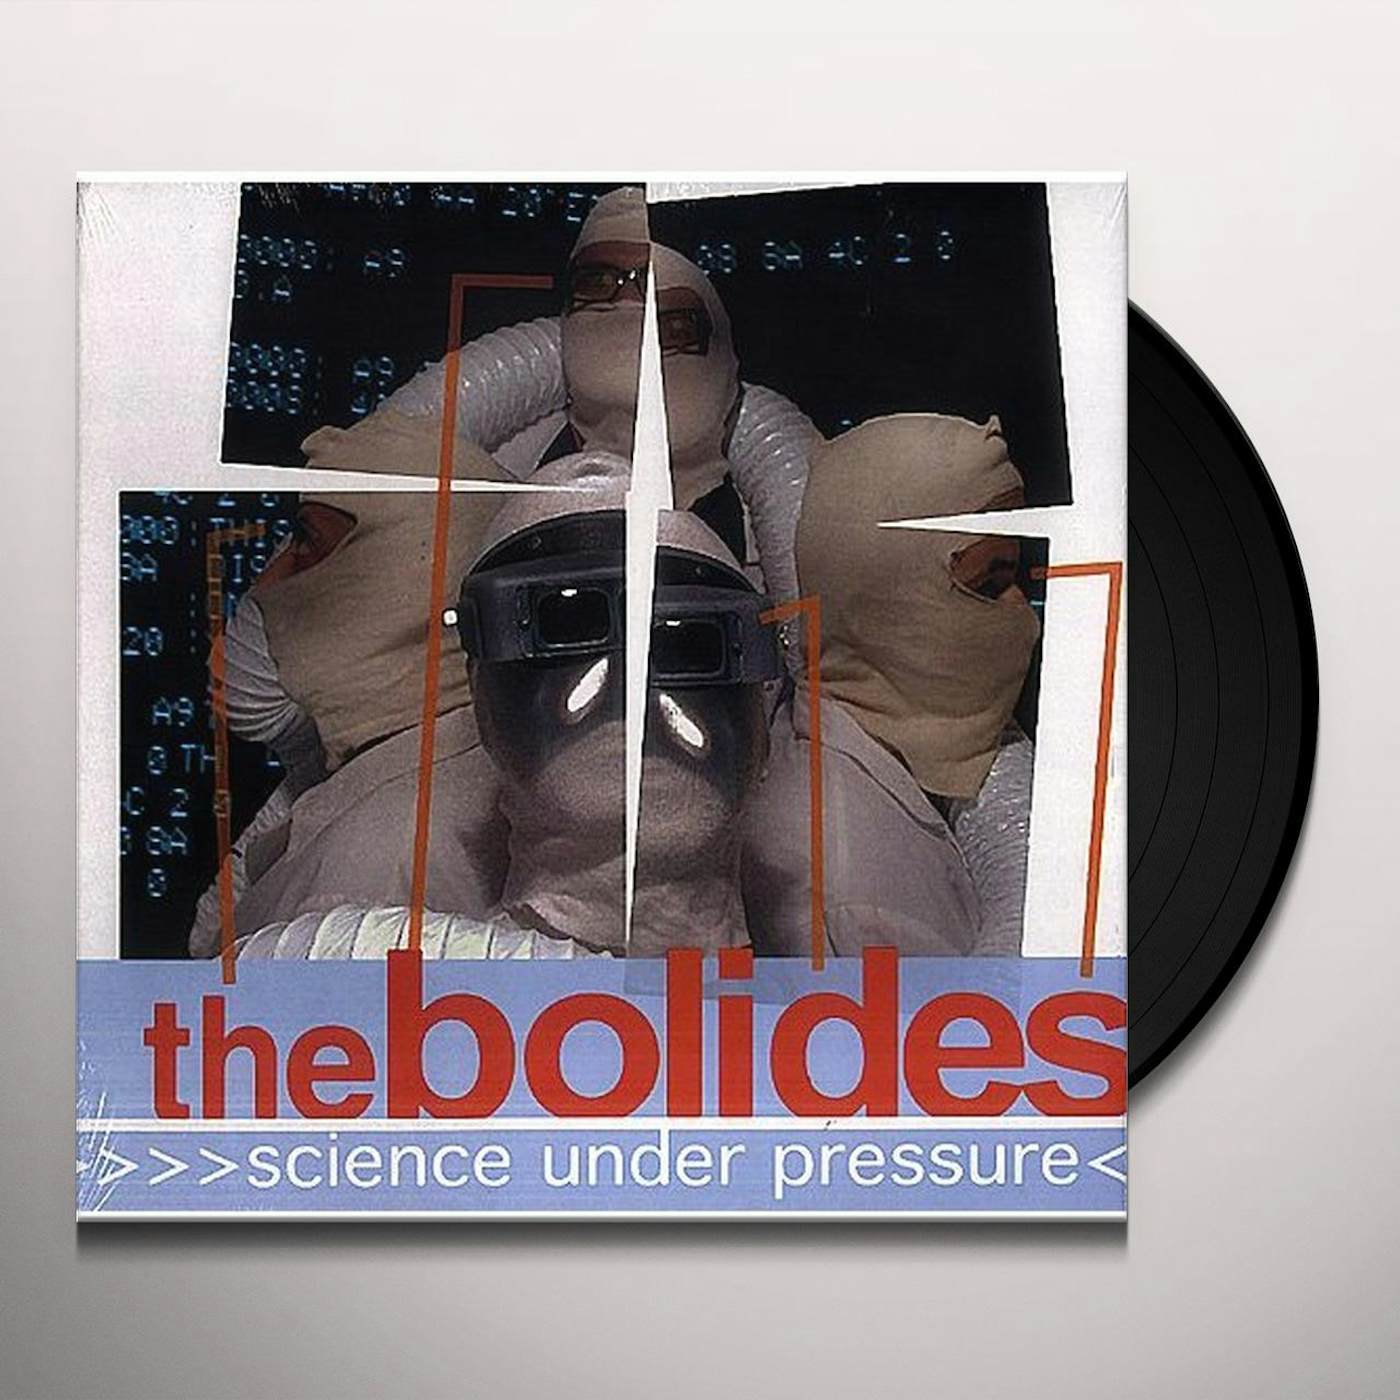 The Bolides Science Under Pressure Vinyl Record